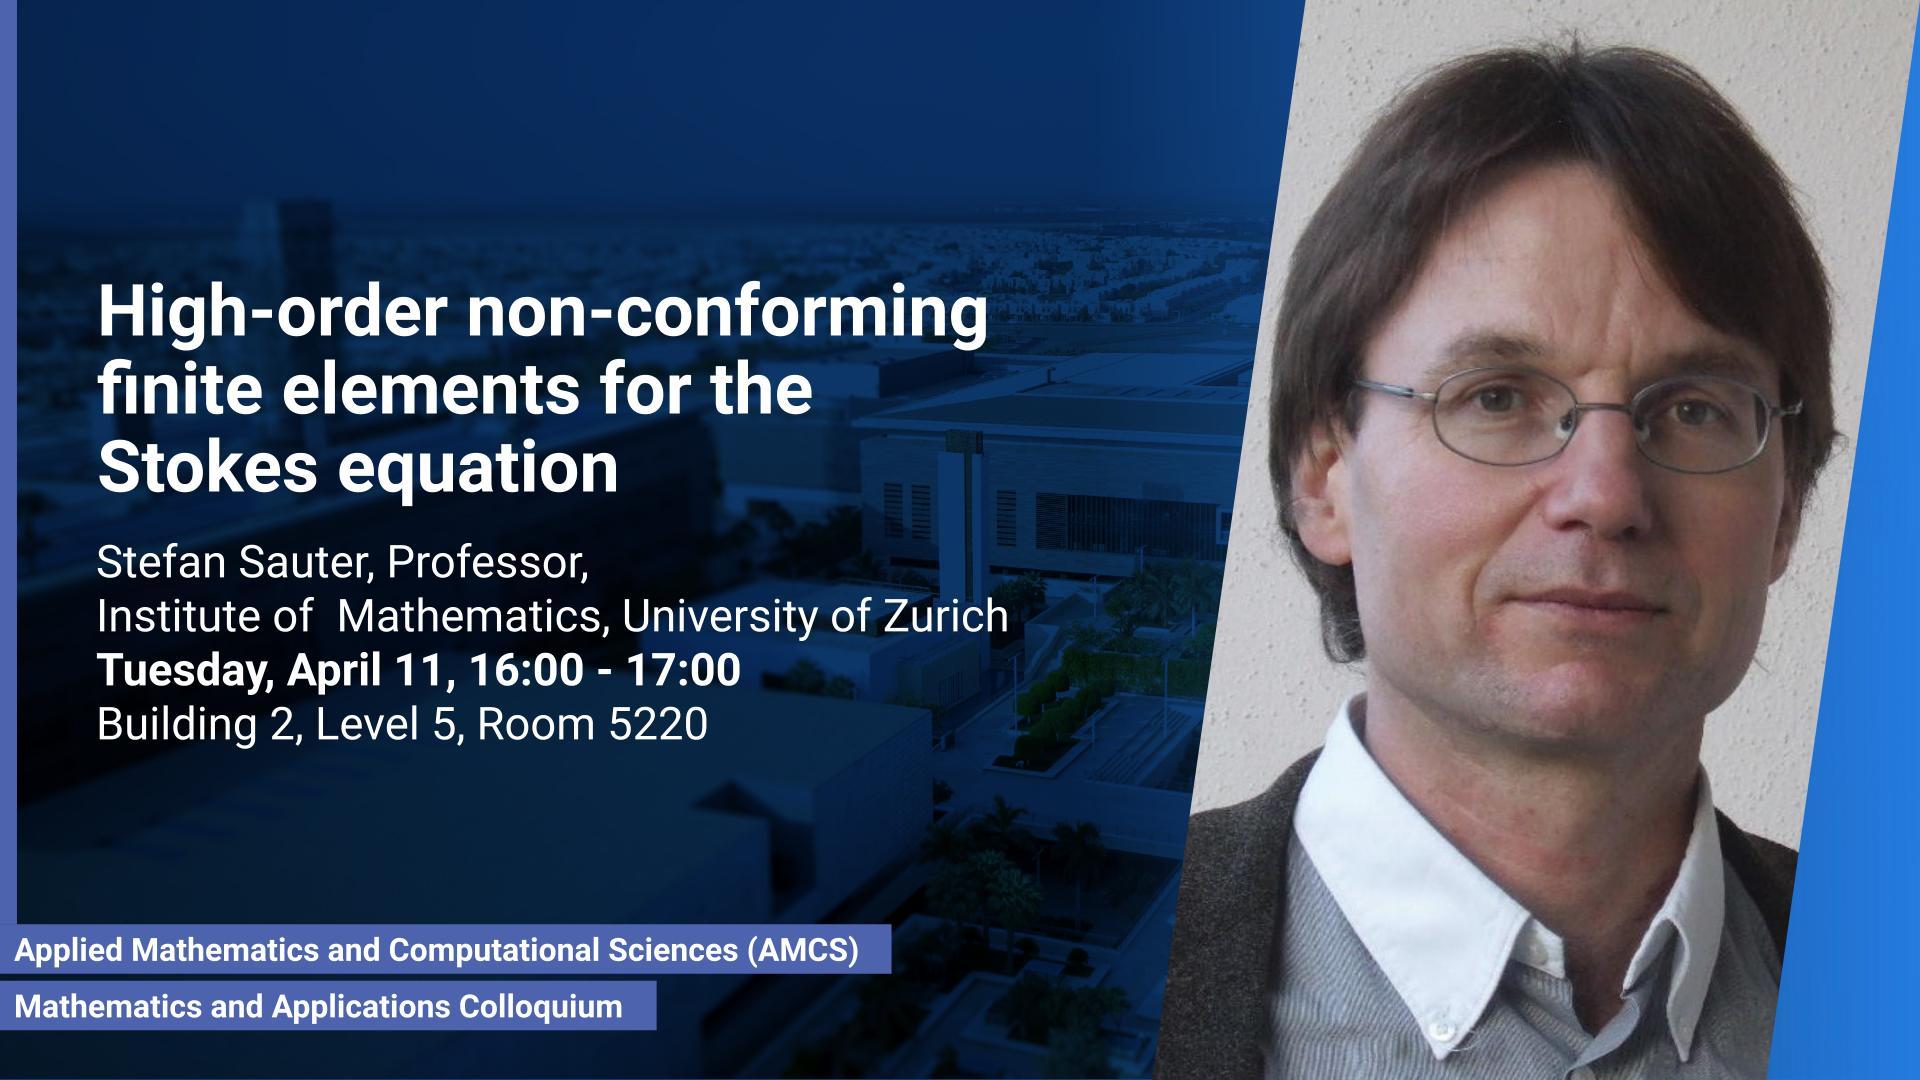 KAUST-CEMSE-AMCS-Mathematic-Application-Colloquium-Prof-Stefan-Sauter-High-order-non-conforming-finite-elements-stokes-equation